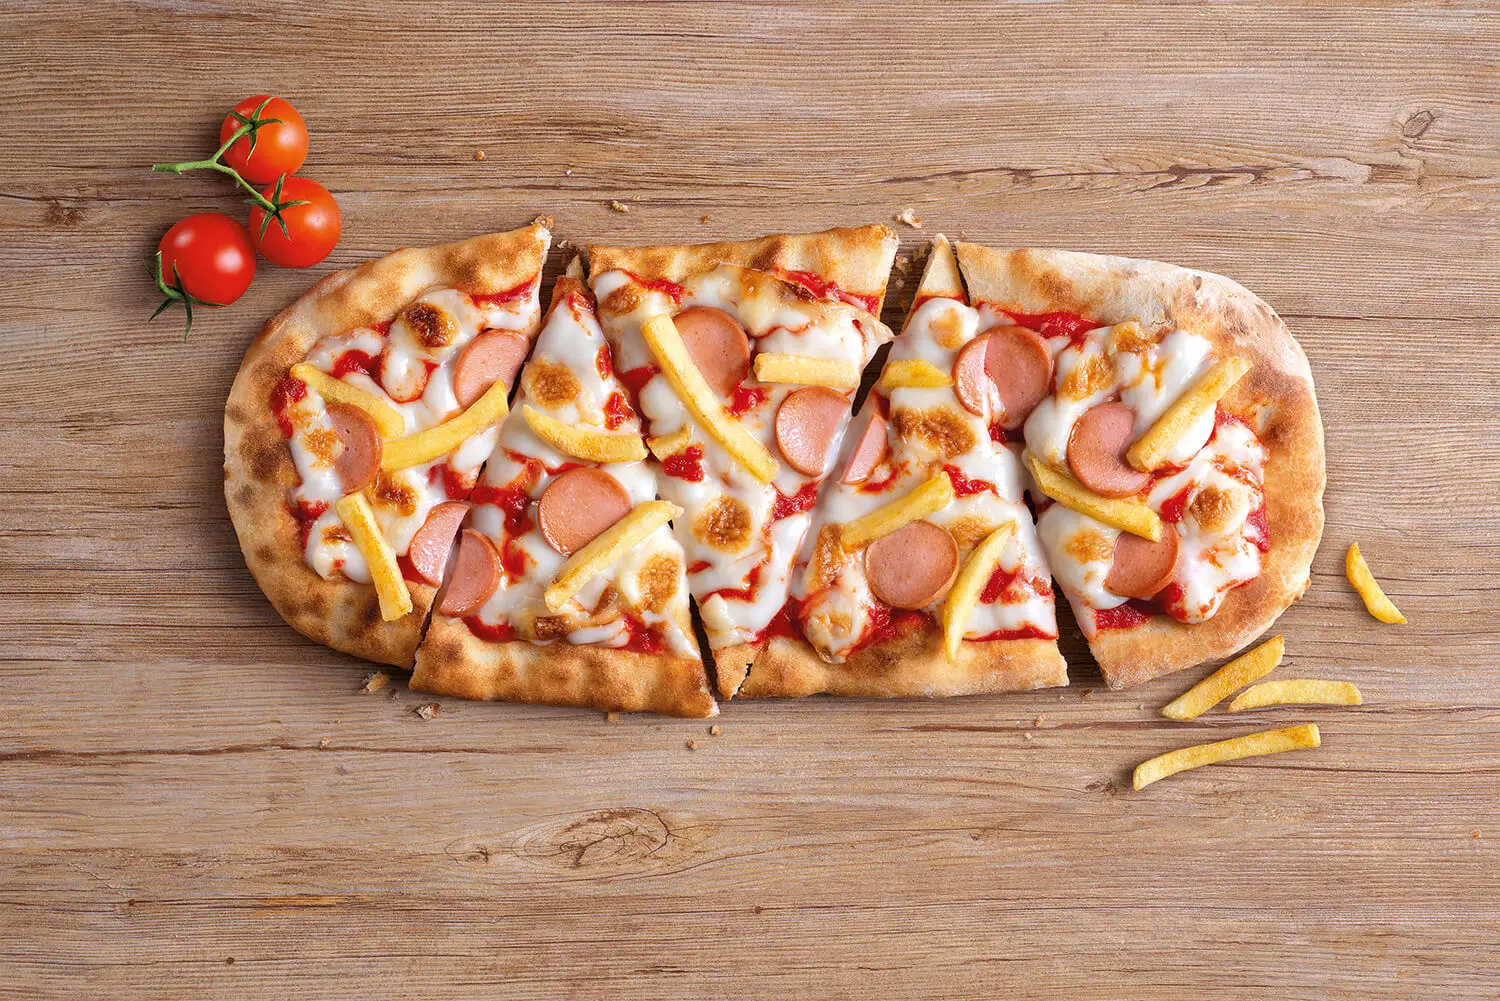 Pizza with frankfurters and chips